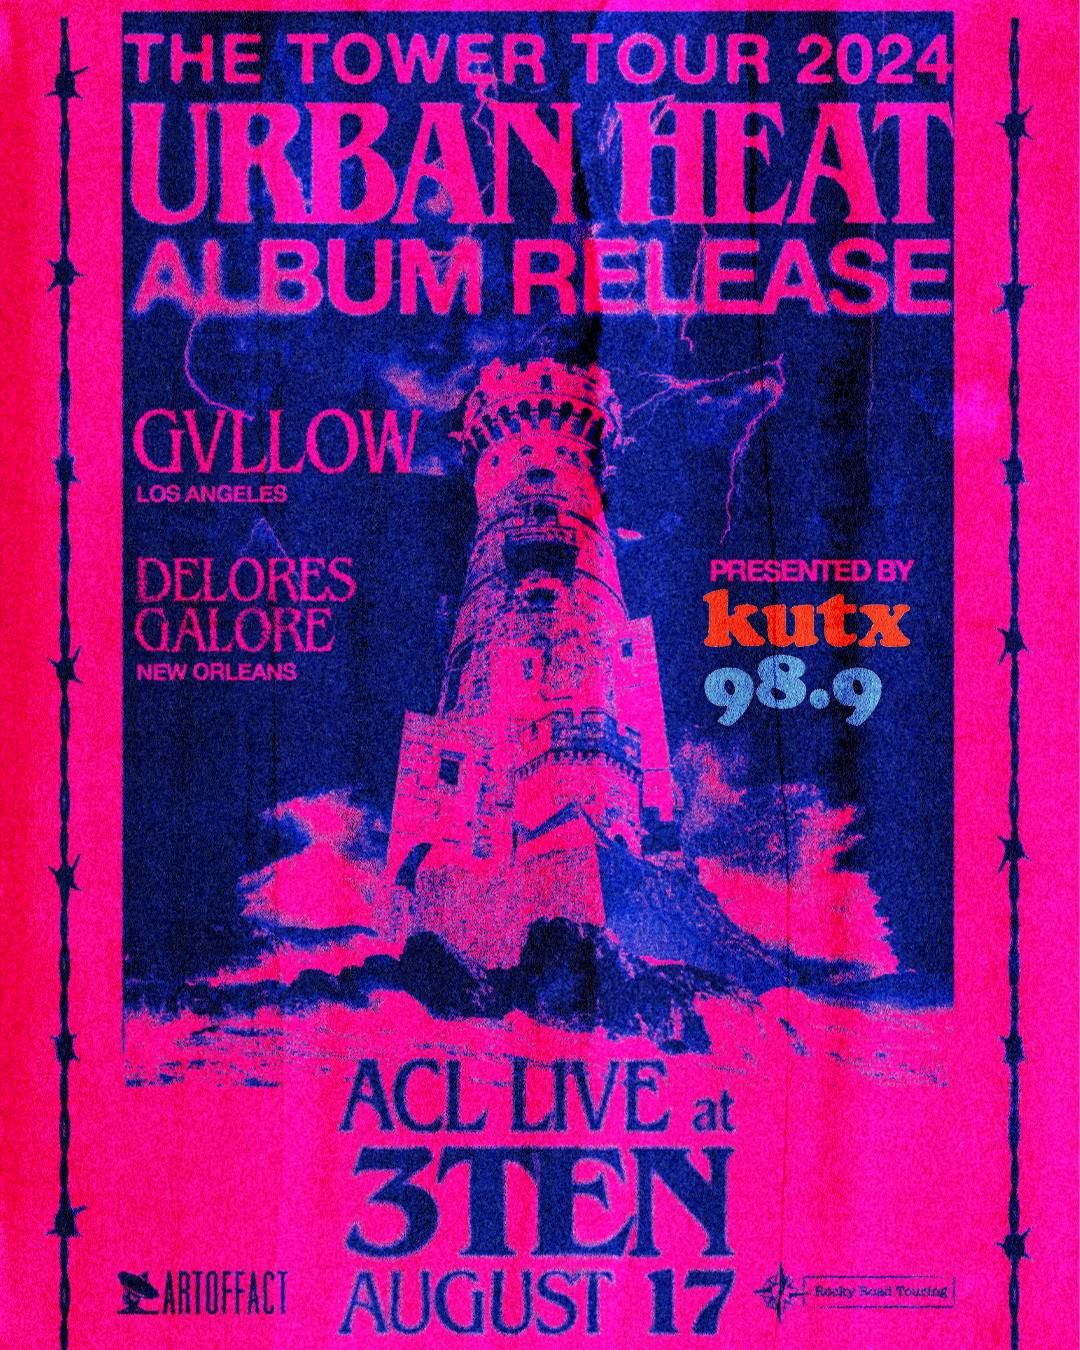 KUTX Presents Urban Heat at ACL Live - Album Release Show